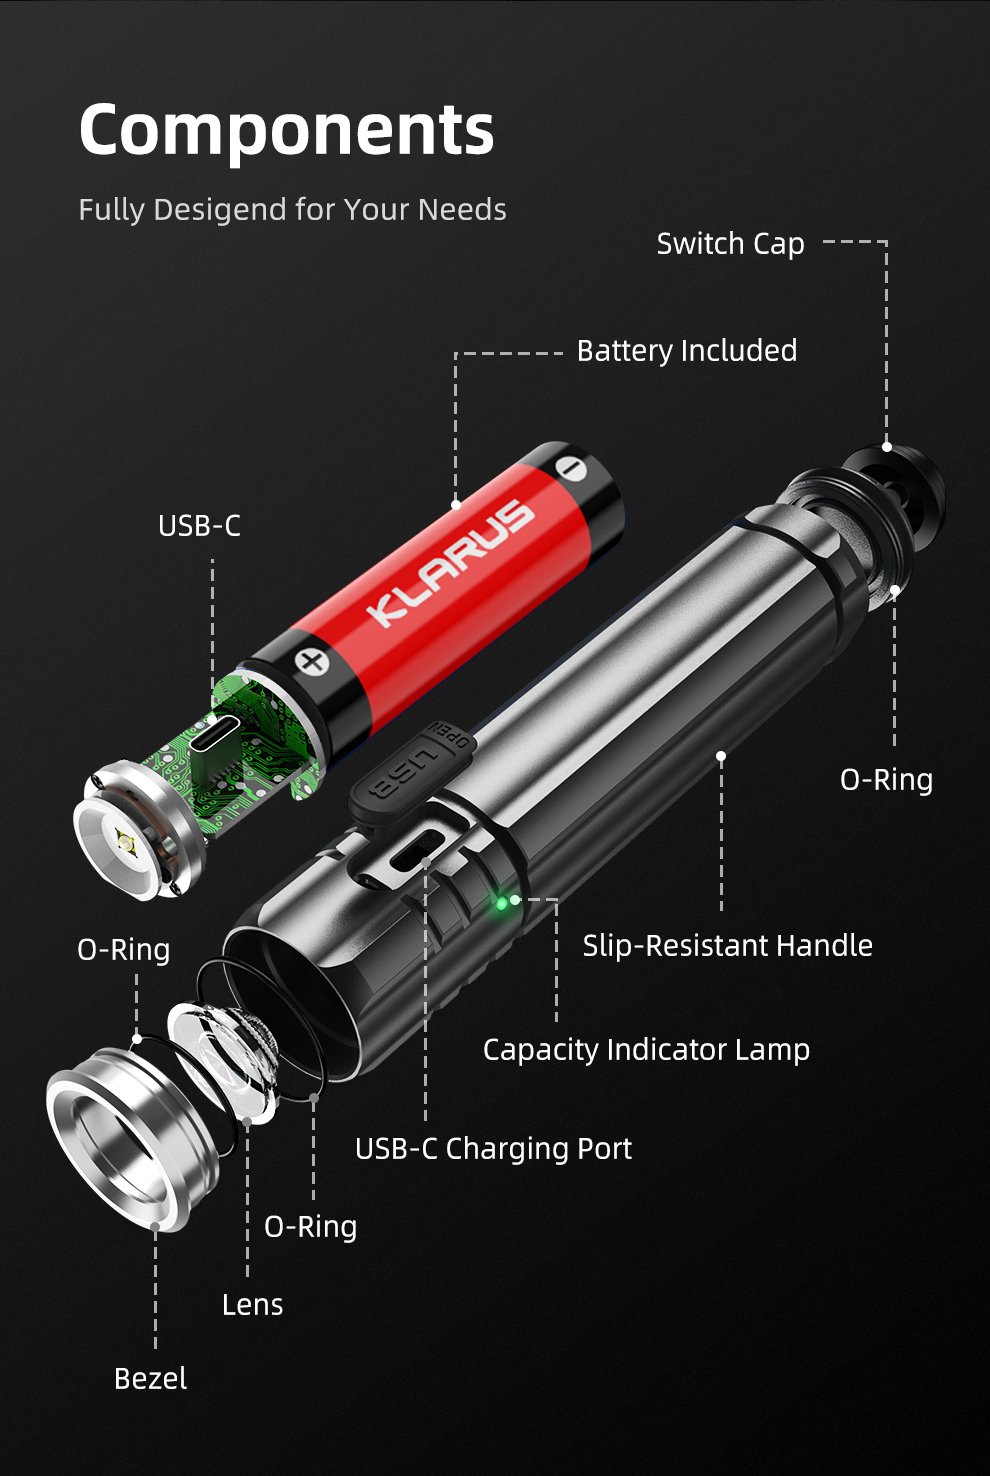 KLARUS-EC20-SST-20-1100LM-Mini-LED-Torch-Rechargeable-Powerful-Flashlight-With-18650-Battery-For-Cam-1965339-10